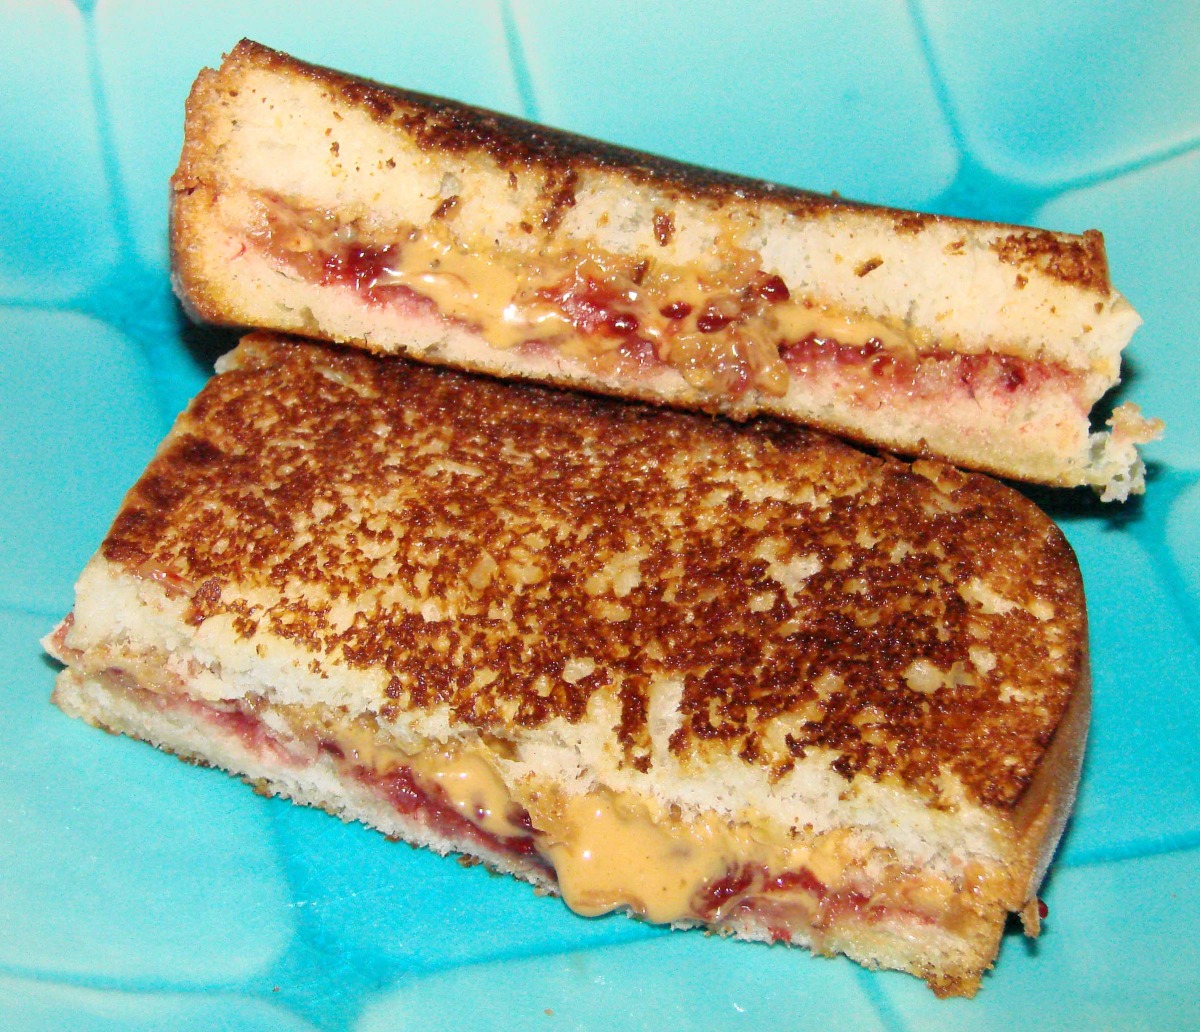 Fried Peanut Butter and Jelly Sandwich Recipe - Food.com